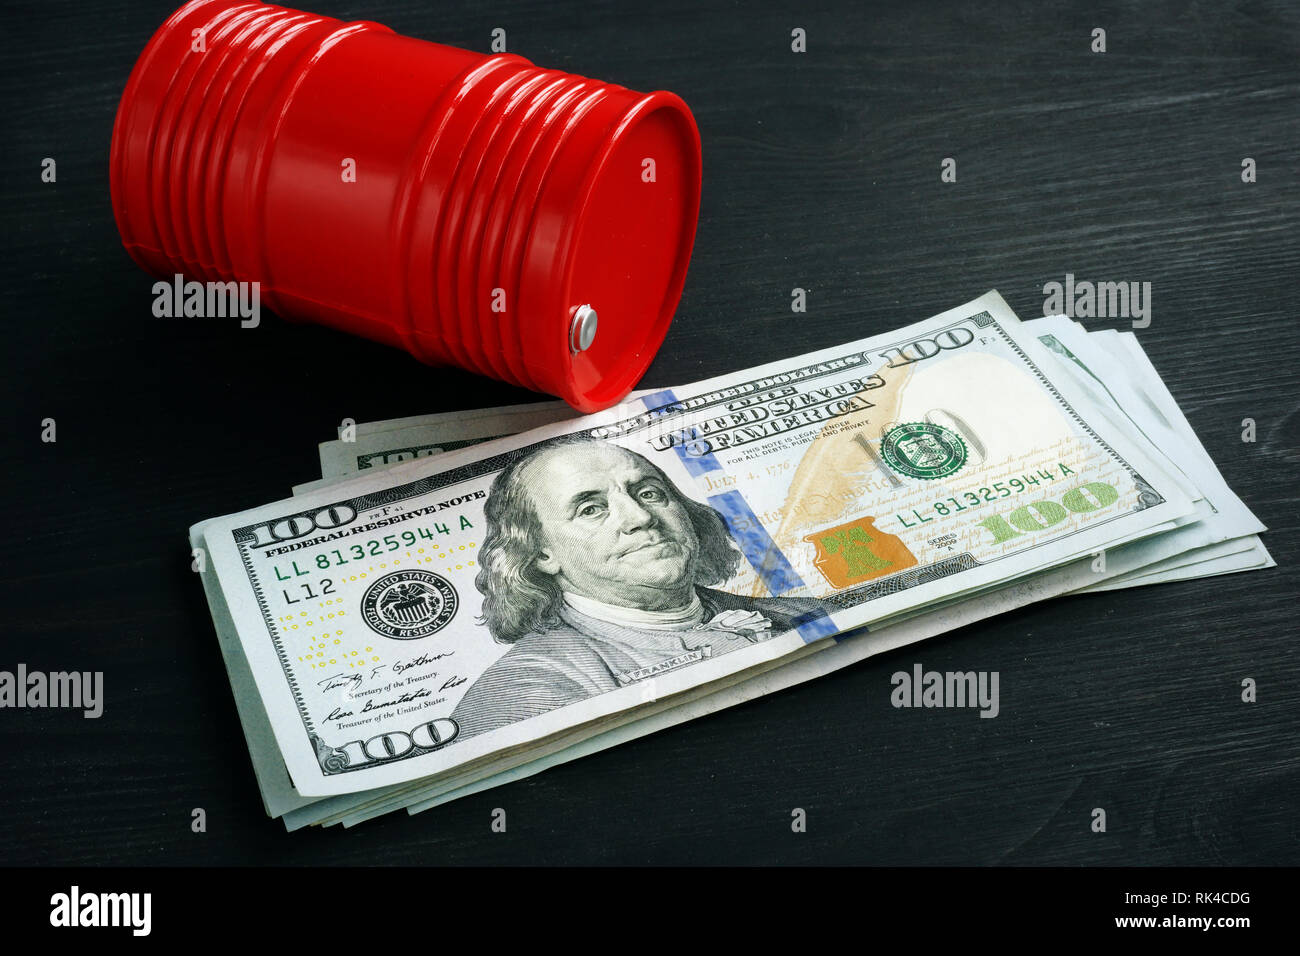 Red oil barrel and money. Oil price and trading. Stock Photo